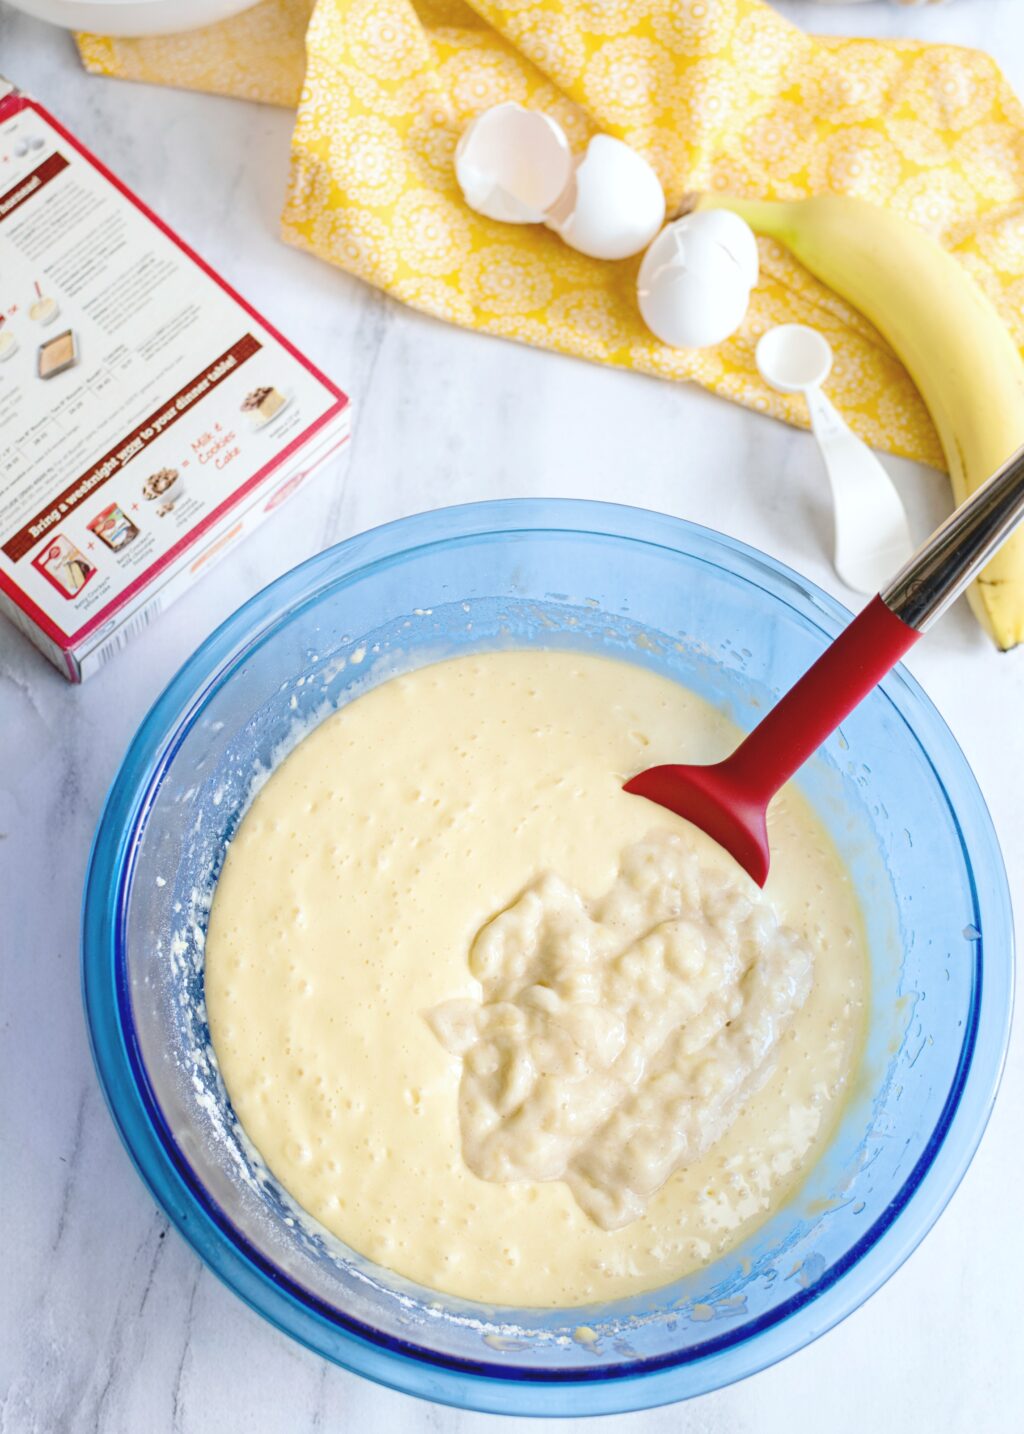 Banana being mixed into cake batter with red spoon.